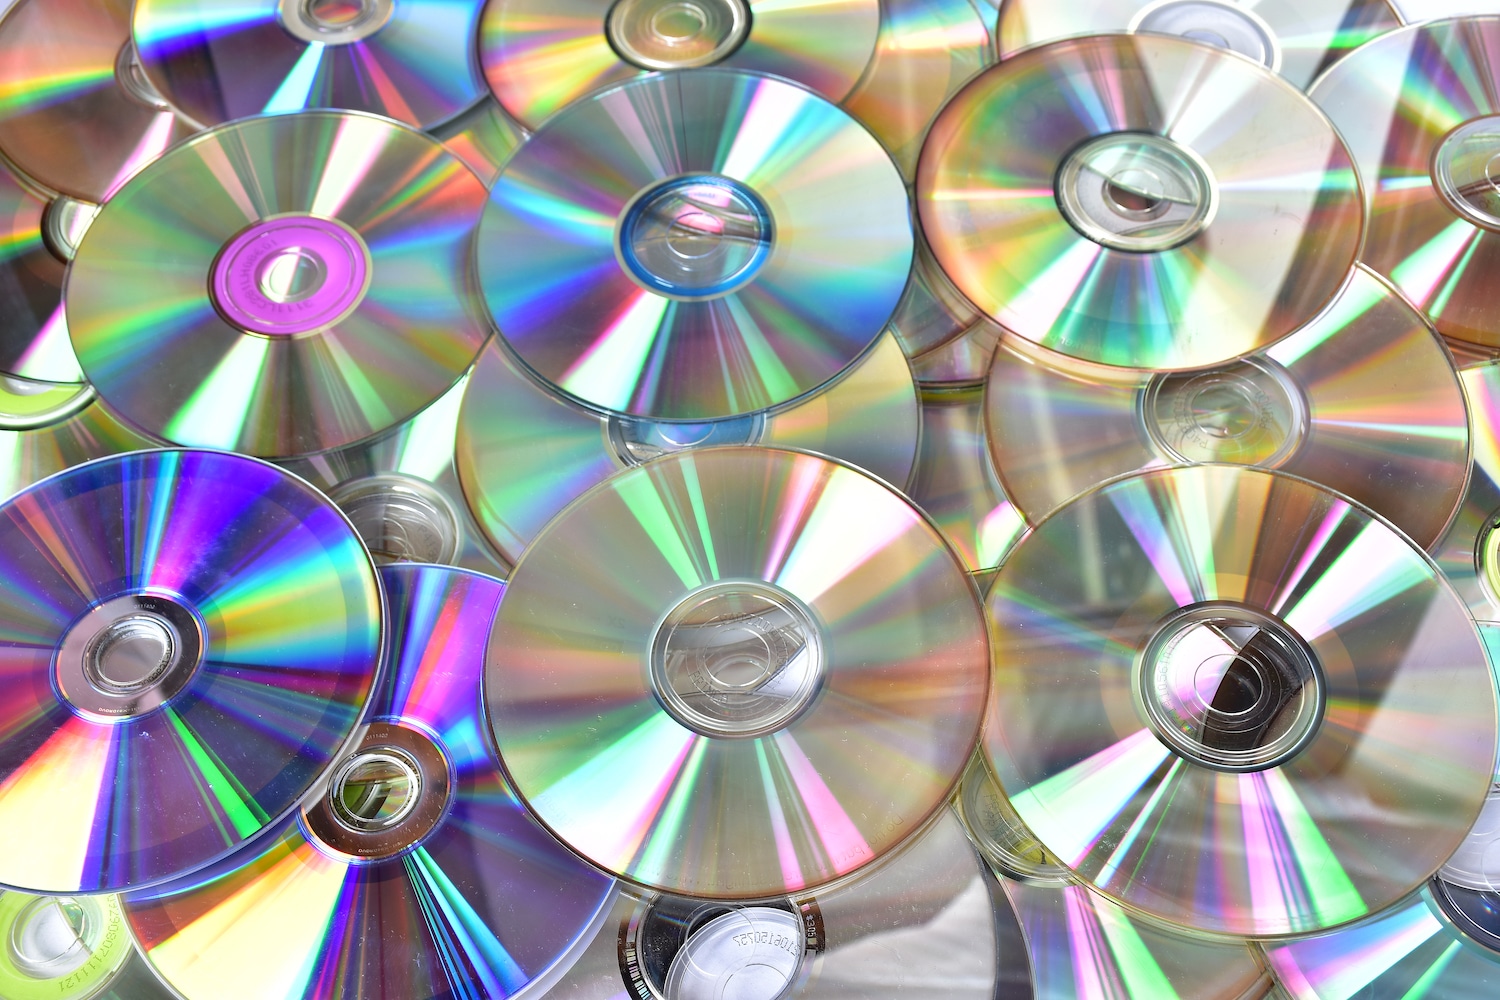 Image shows pile of old dirty used cds and dvds